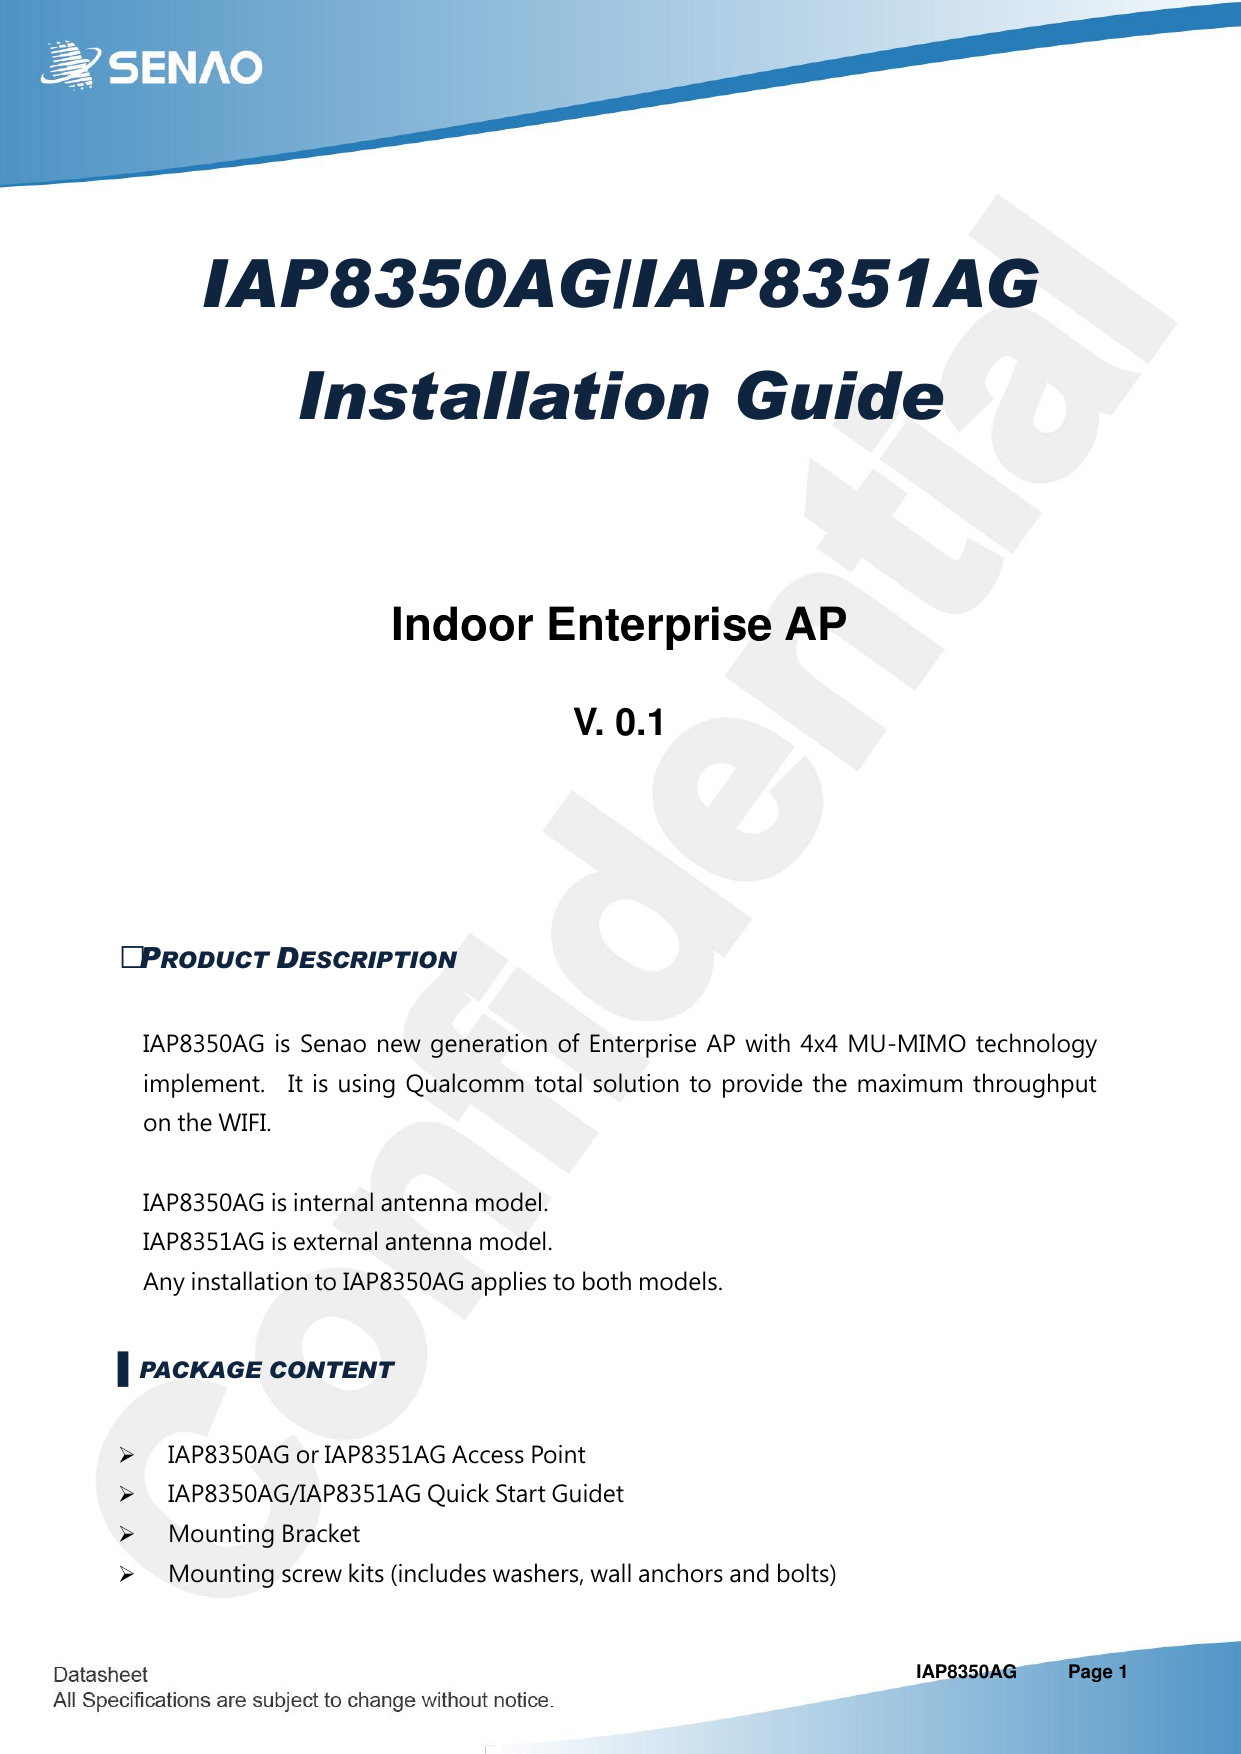                                                                                                                                                                            IAP8350AG   Page 1 IAP8350AG/IAP8351AG Installation Guide   Indoor Enterprise AP  V. 0.1   ▌PRODUCT DESCRIPTION IAP8350AG  is  Senao  new  generation  of  Enterprise  AP  with  4x4  MU-MIMO  technology implement.    It is using Qualcomm total solution to  provide  the  maximum  throughput on the WIFI.                                                     IAP8350AG is internal antenna model.     IAP8351AG is external antenna model. Any installation to IAP8350AG applies to both models. ▌PACKAGE CONTENT  IAP8350AG or IAP8351AG Access Point  IAP8350AG/IAP8351AG Quick Start Guidet  Mounting Bracket  Mounting screw kits (includes washers, wall anchors and bolts) 